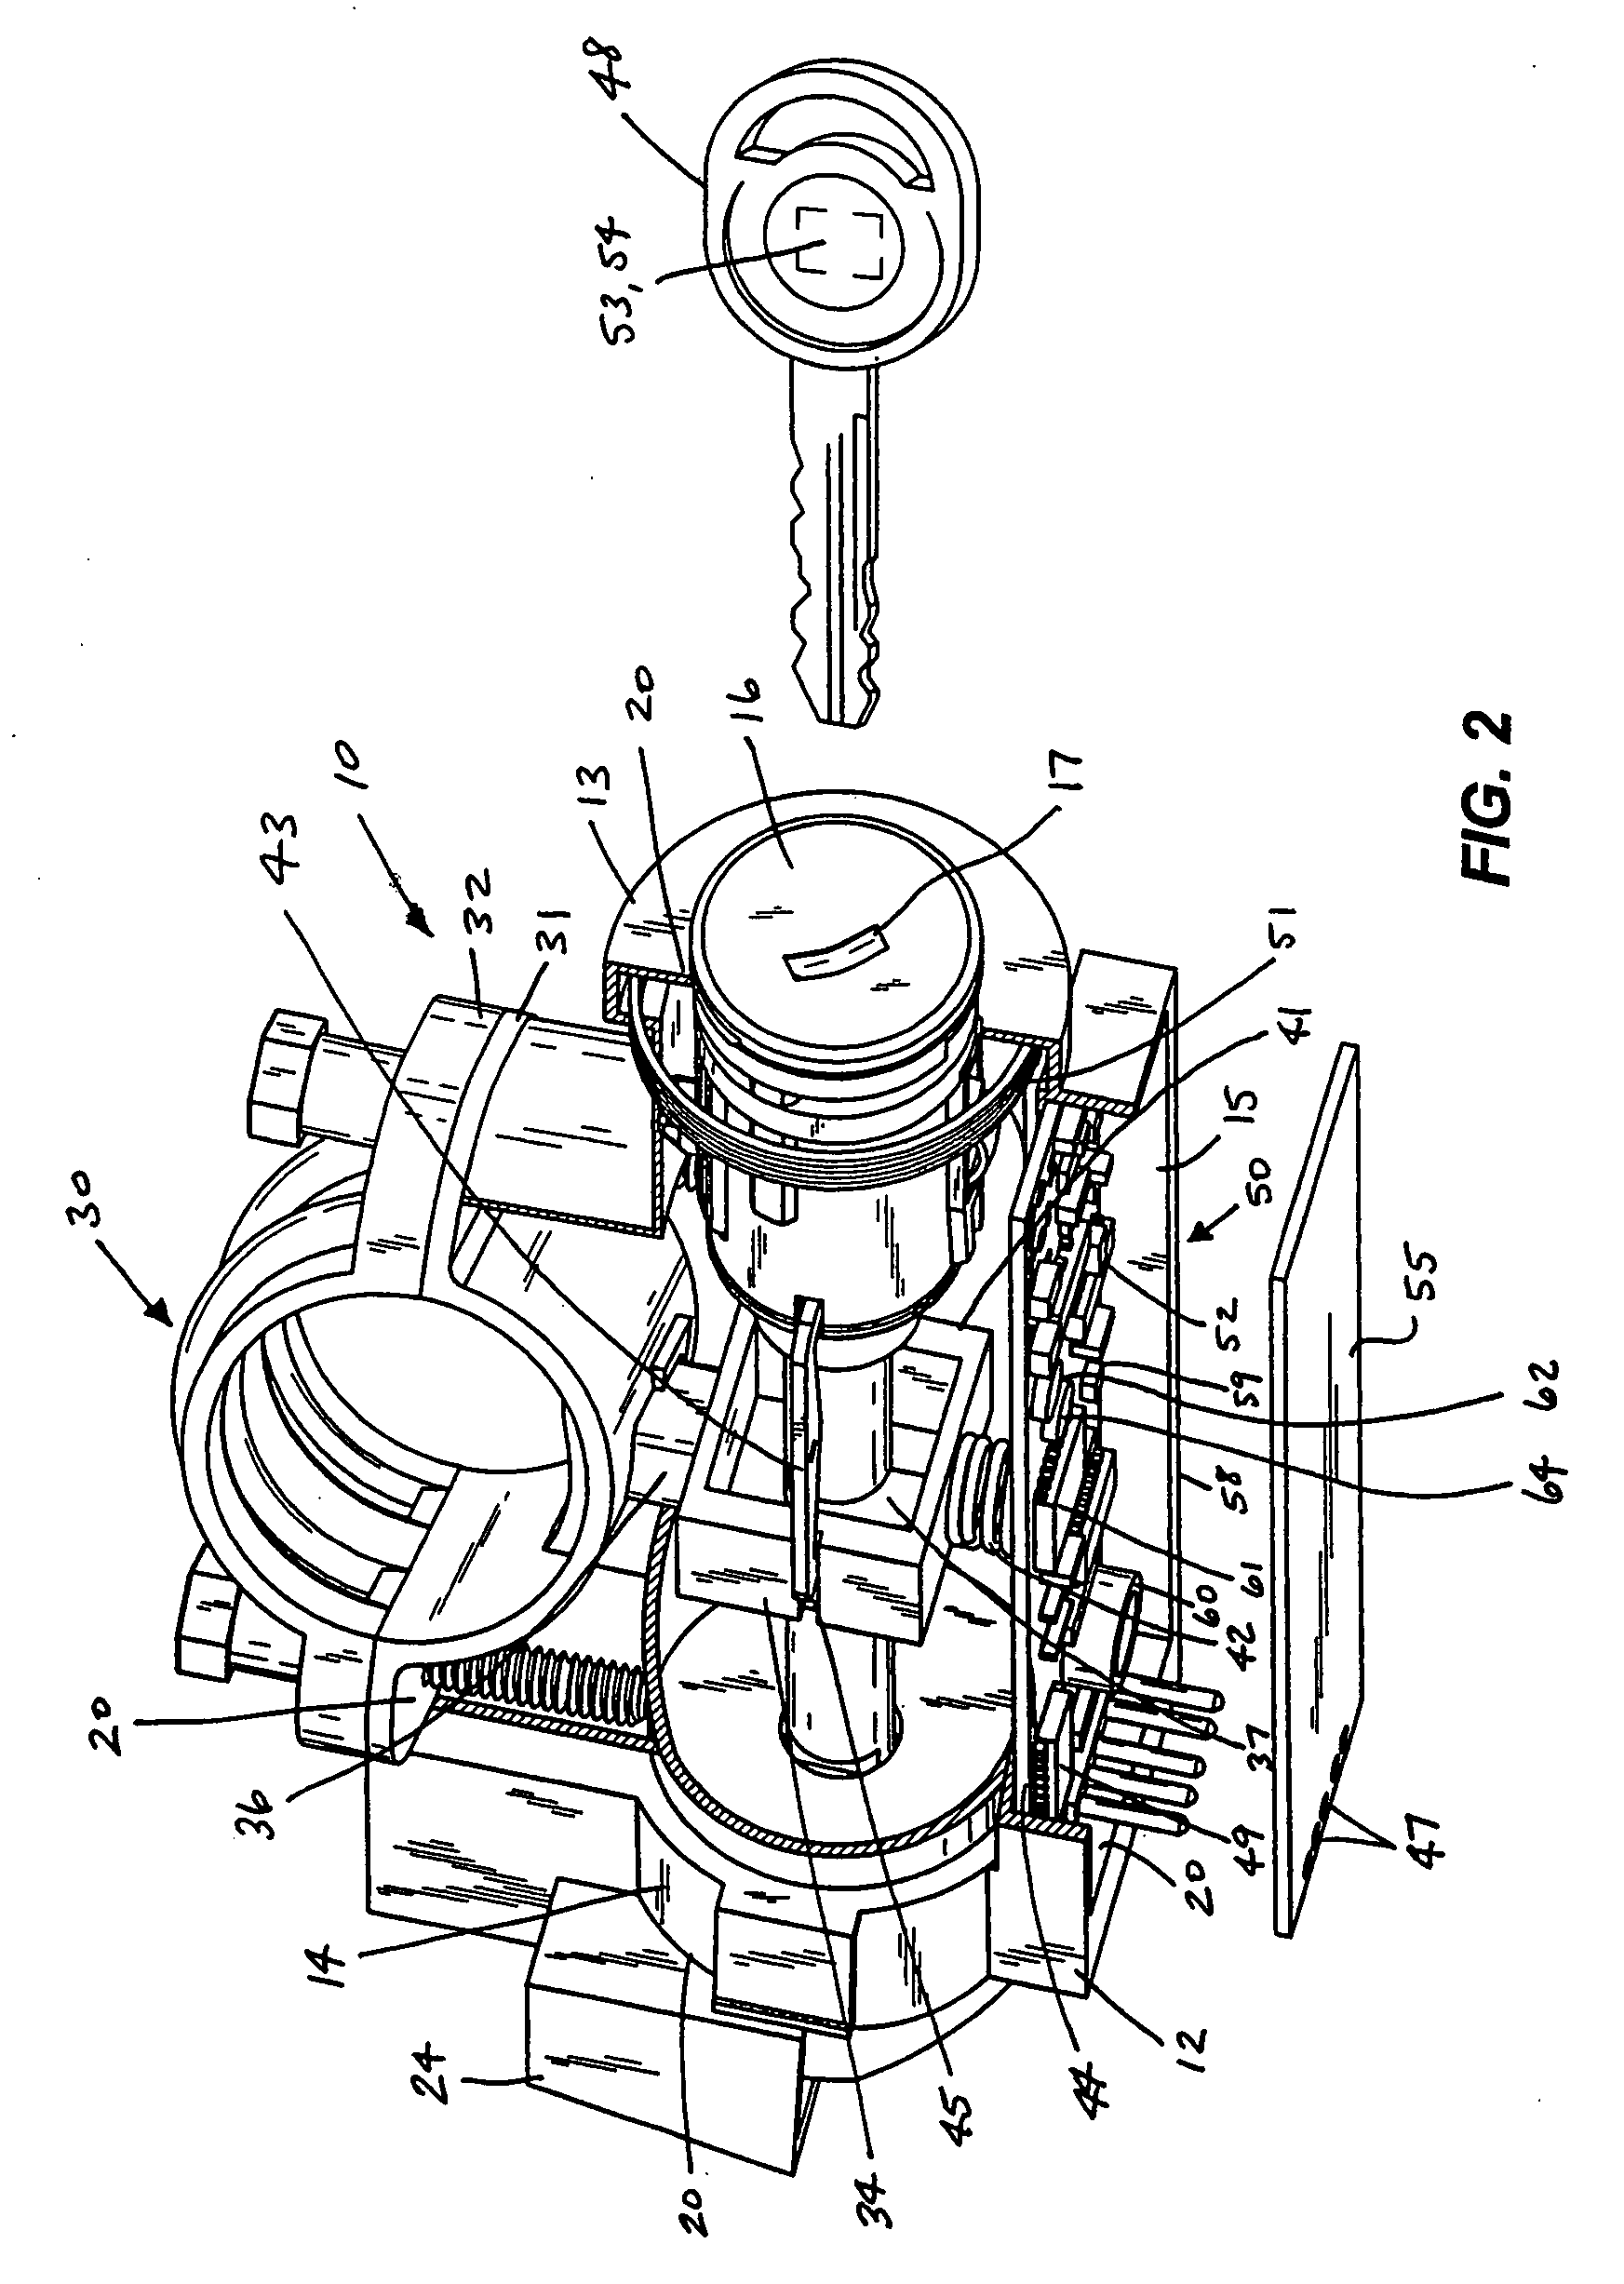 Ignition apparatus and method